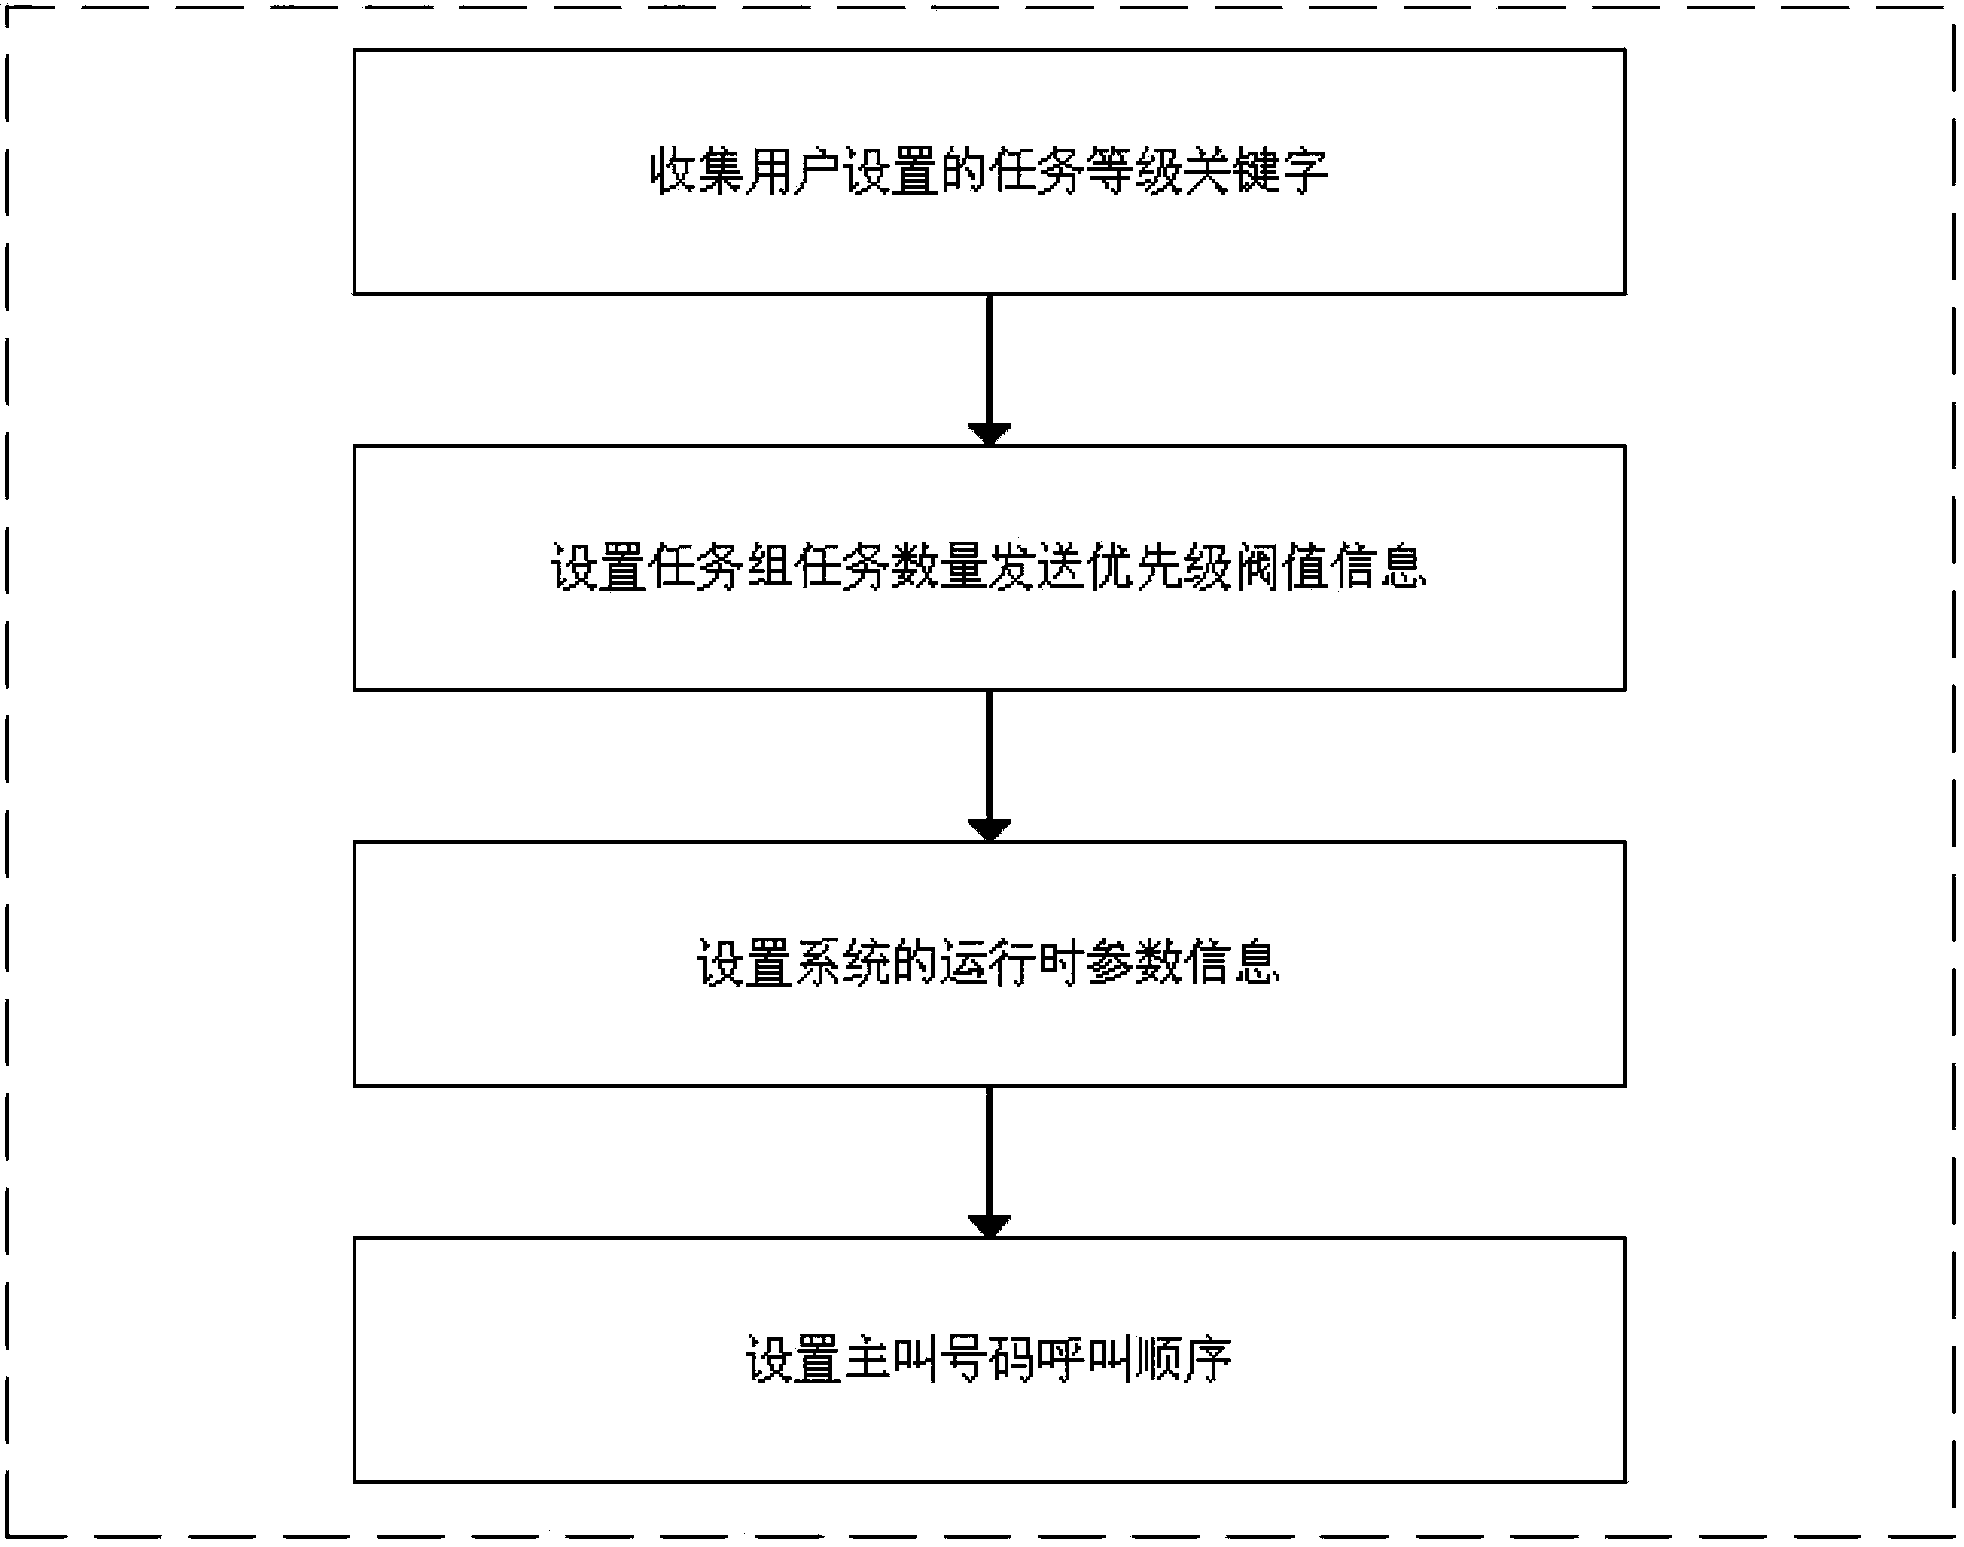 Intelligent dispatching system and dispatching method for mass individual voice calls